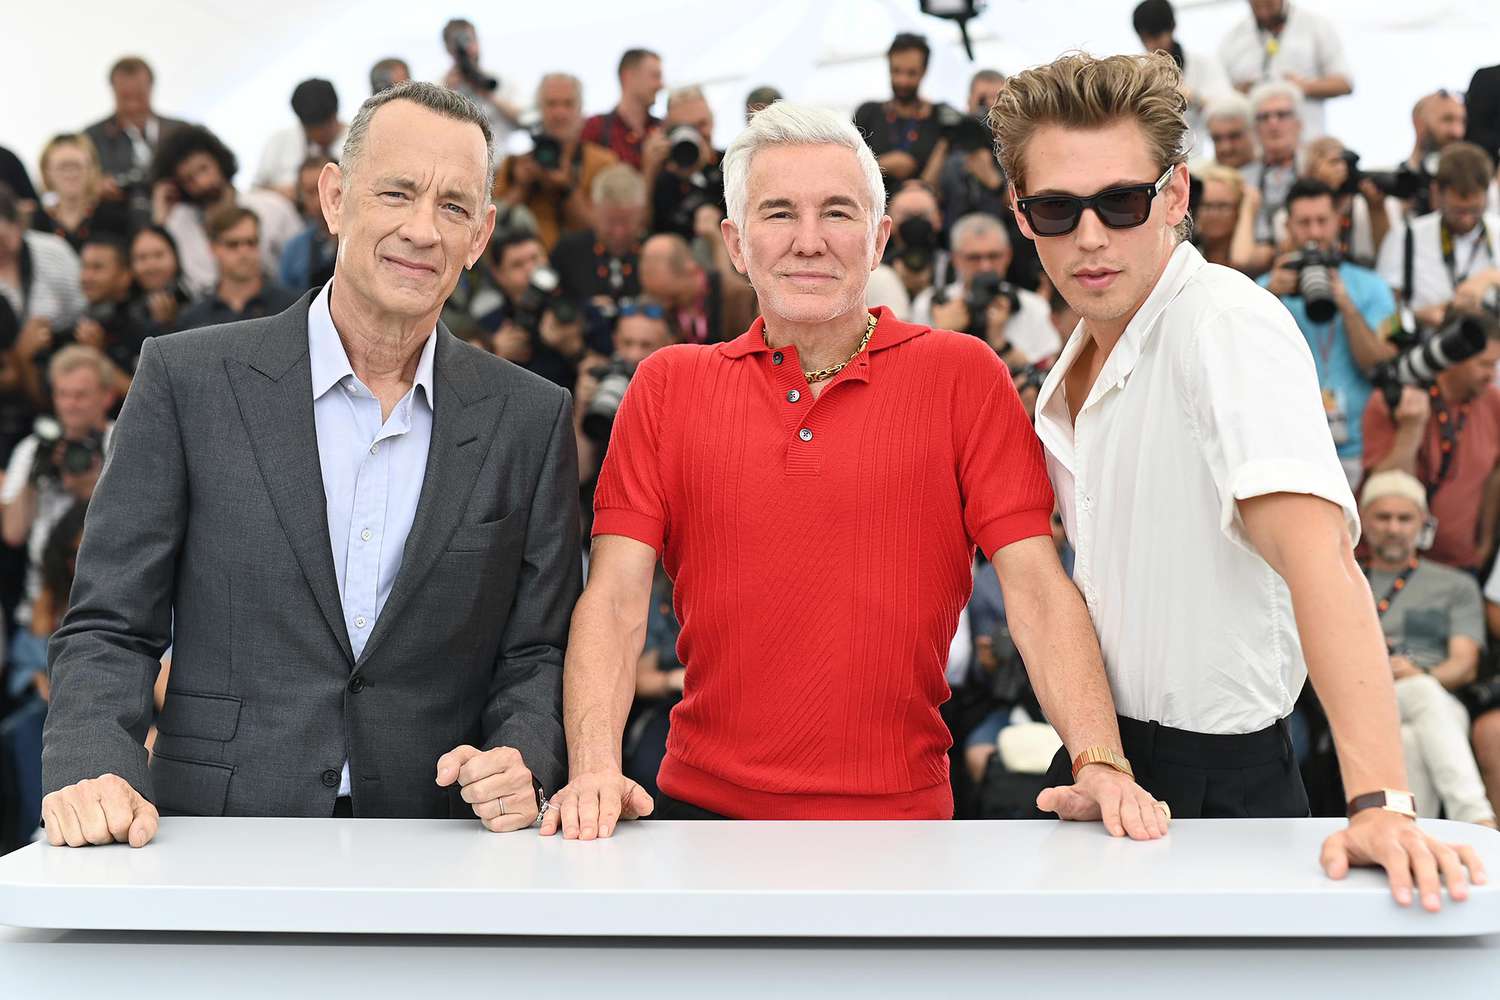 Tom Hanks, Director Baz Luhrmann and Austin Butler attend the photocall for "Elvis" during the 75th annual Cannes film festival at Palais des Festivals on May 26, 2022 in Cannes, France.